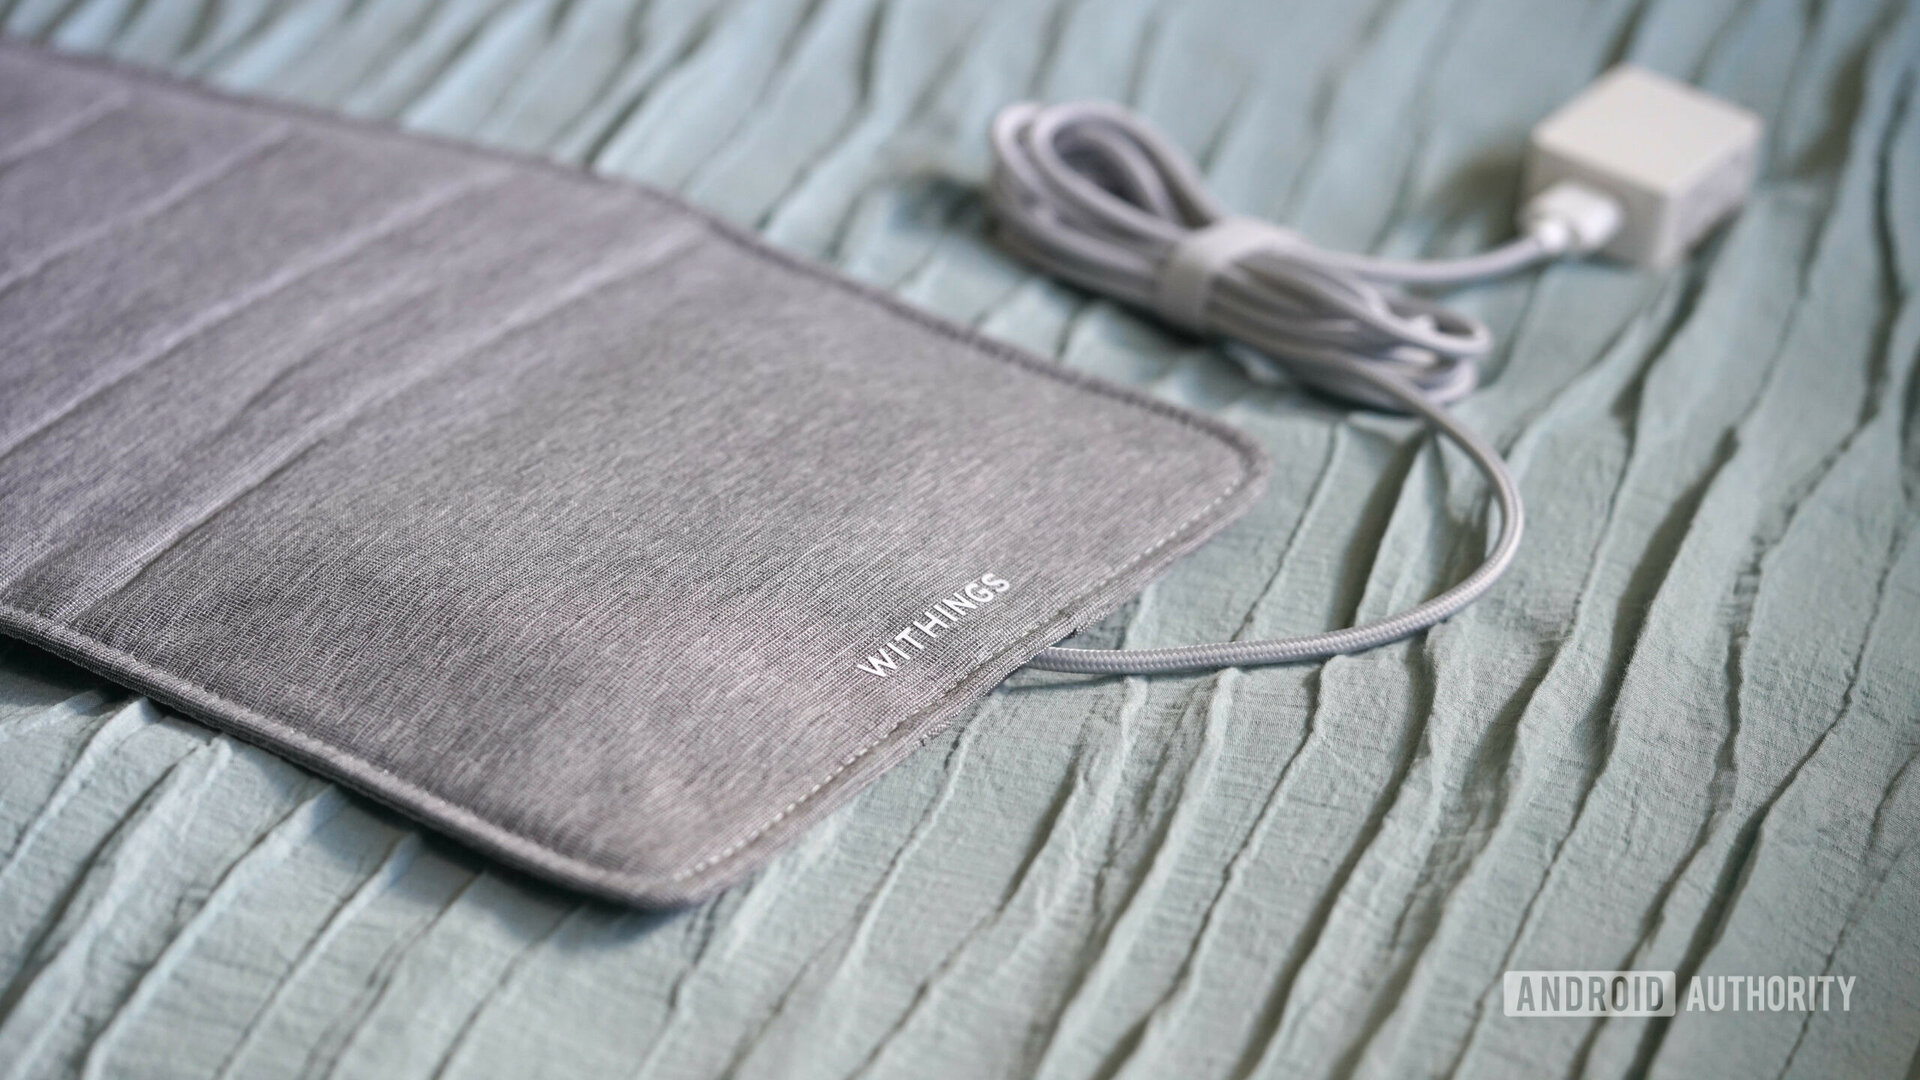 A Withings Sleep Tracking Mat rests on a sage comforter.